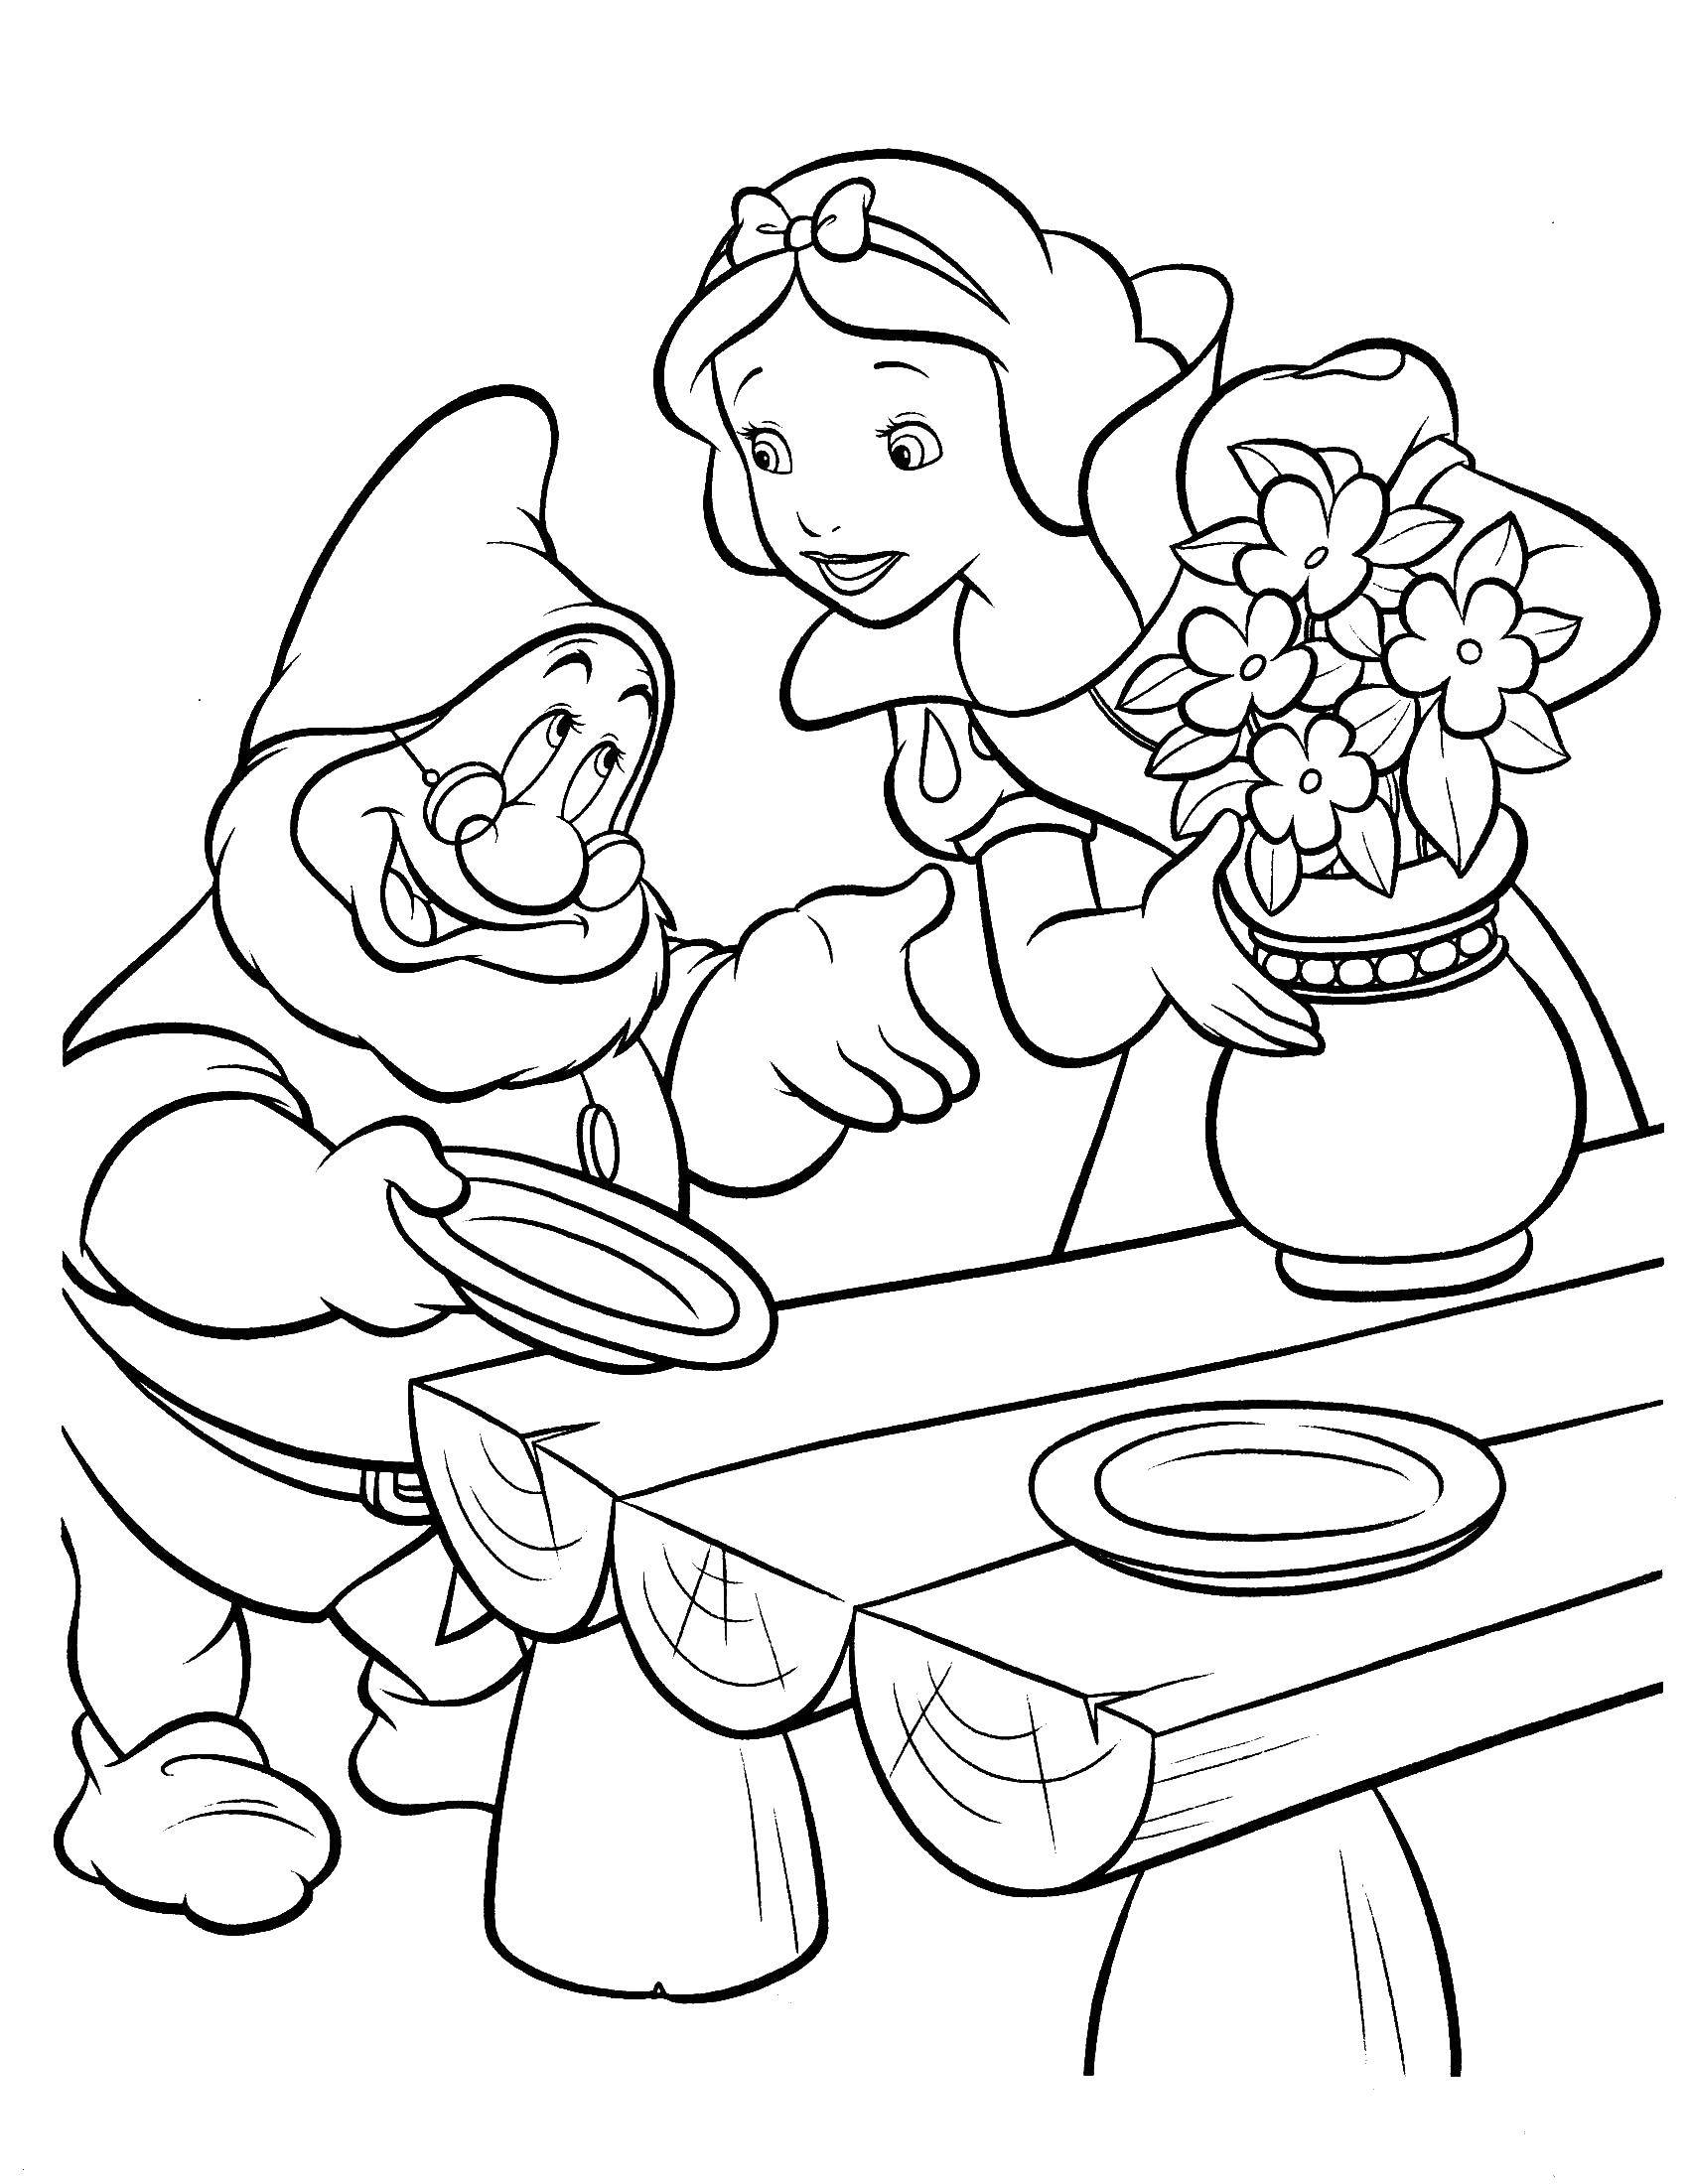 Coloring Snow white and dwarf. Category snow white. Tags:  snow white, dwarf, fairy tales.